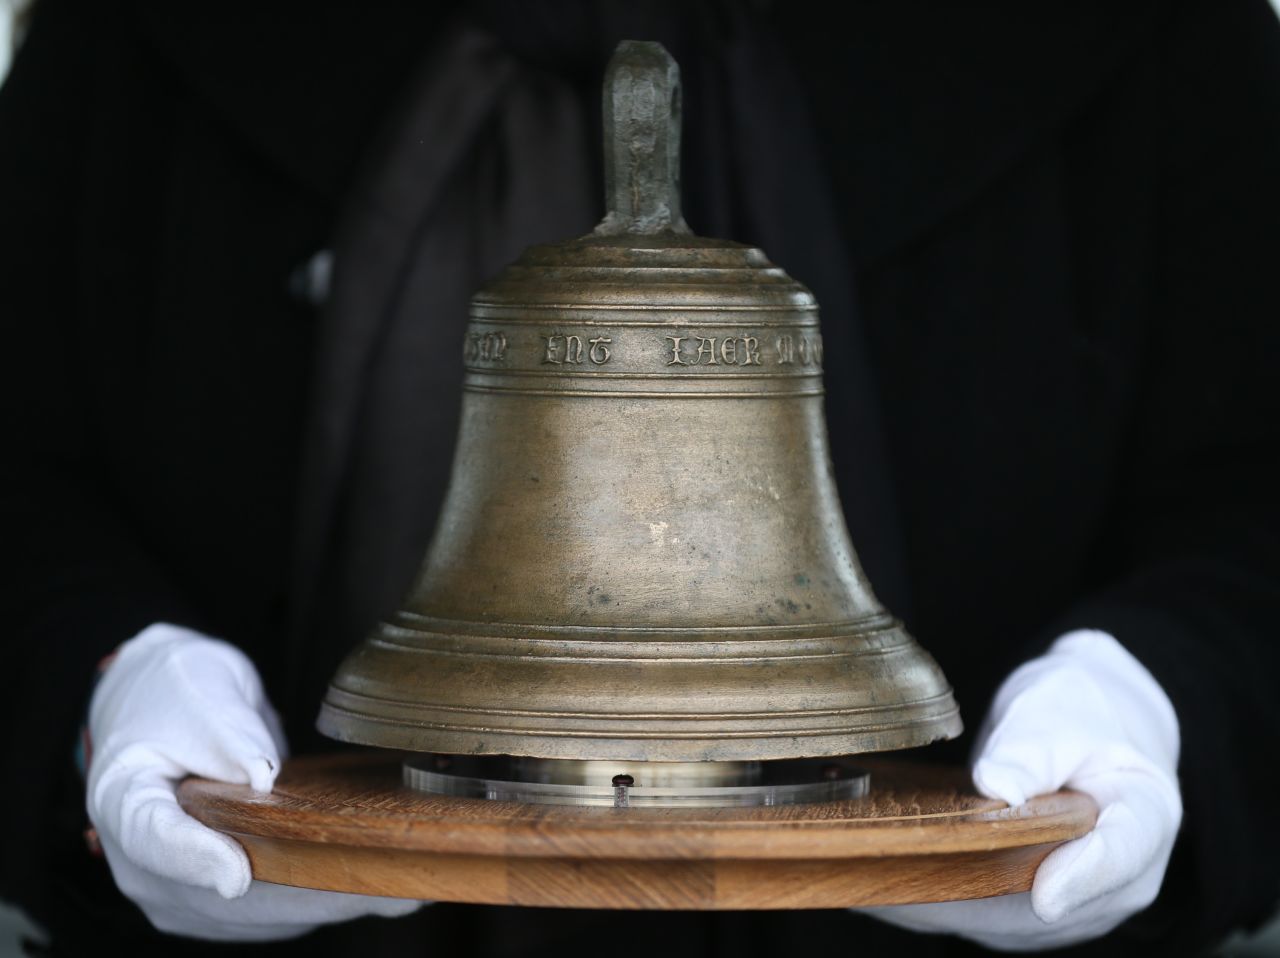 Conservator Susan Bickerton holds the original ship's bell at the location of it's 16th Century sinking.